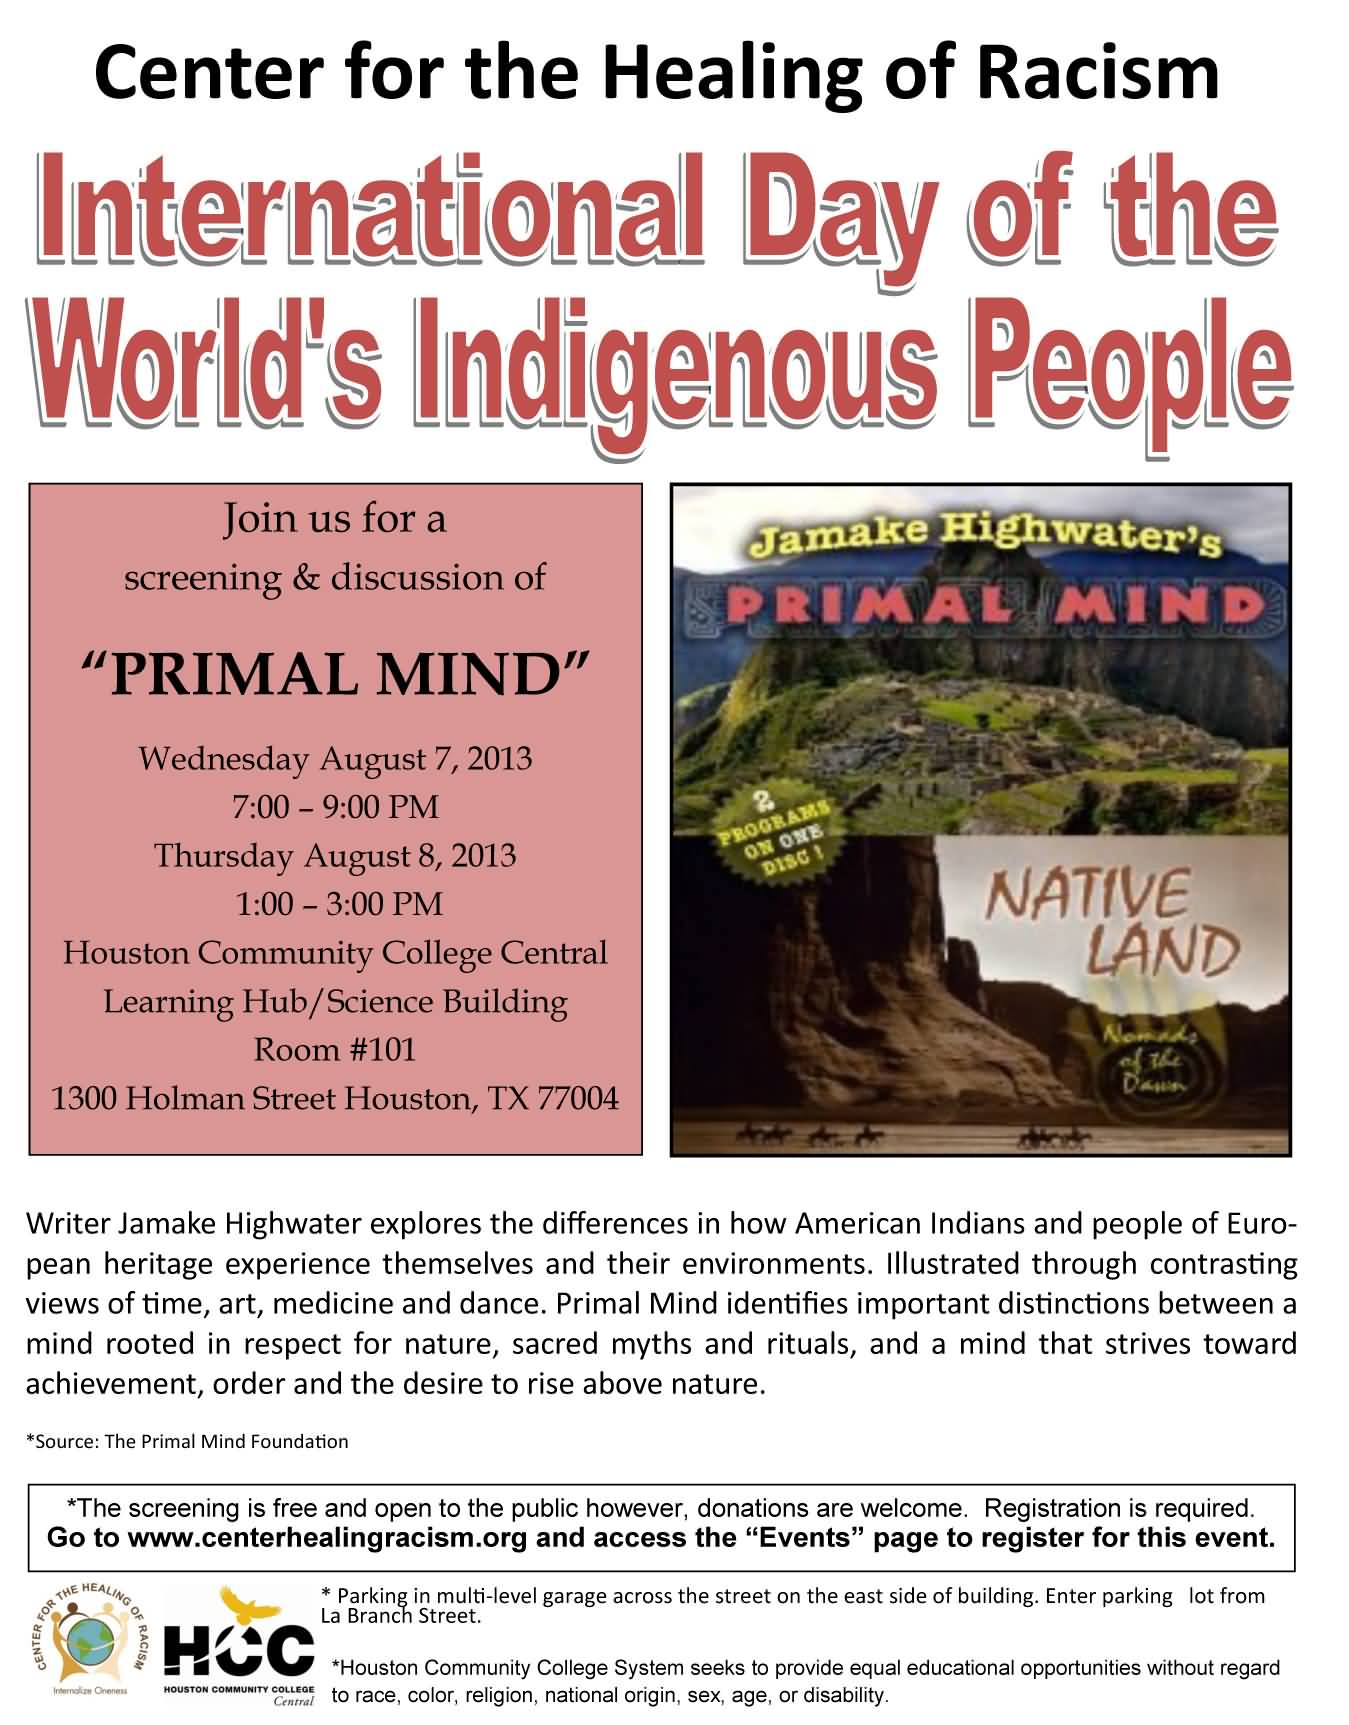 Center For The Healing Of Racism International Day of the World's Indigenous People Poster